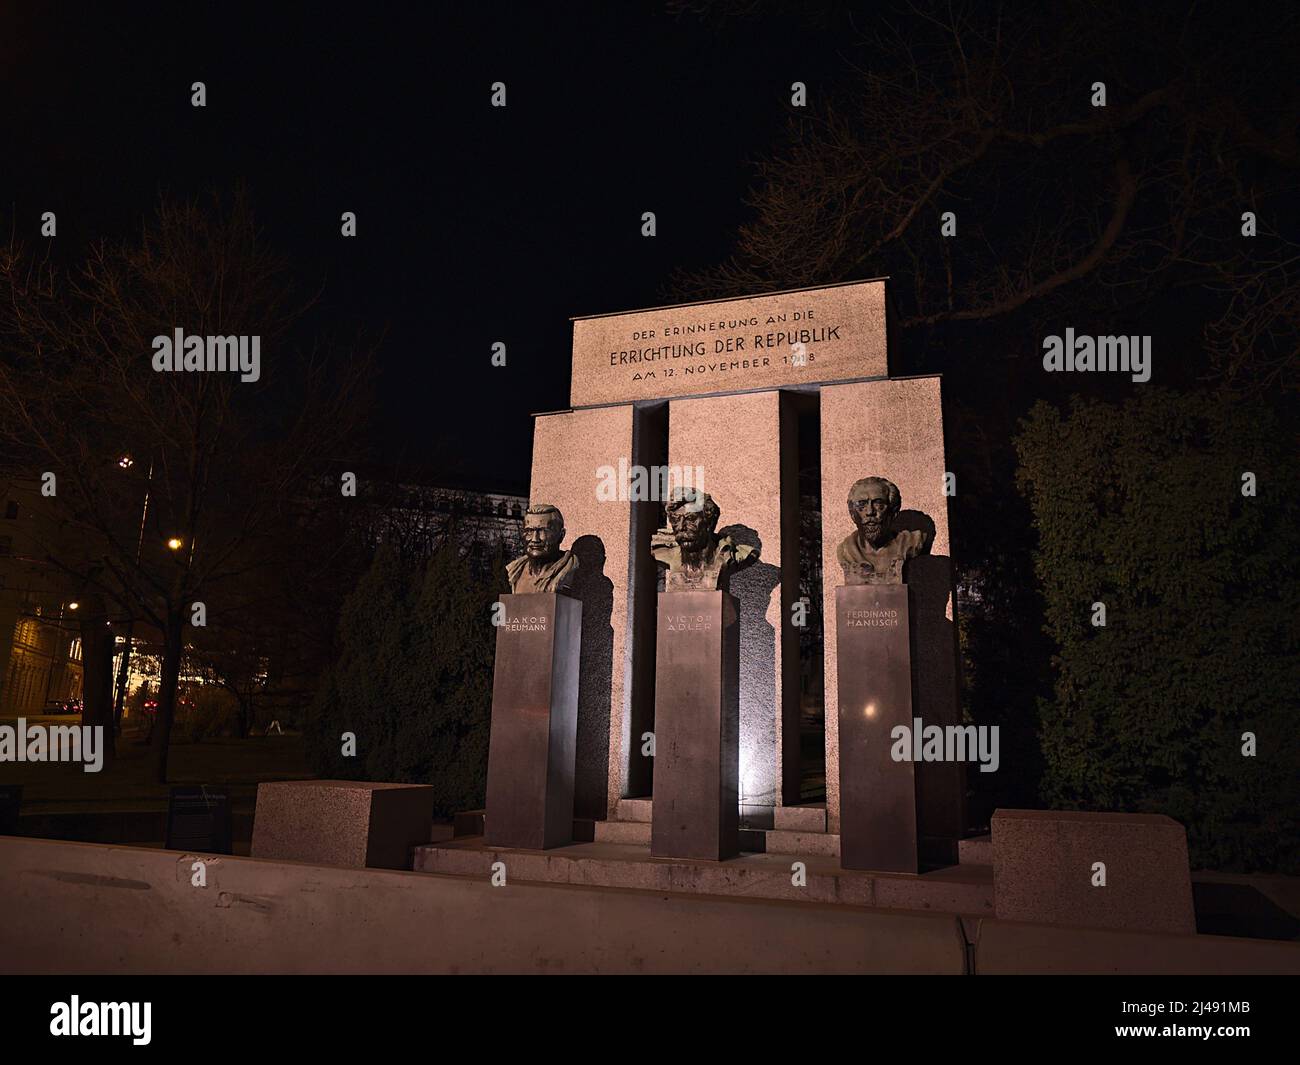 Night view of monument Denkmal der Republik in the historic downtown of Vienna, Austria reminding of the proclamation of the republic German Austria. Stock Photo